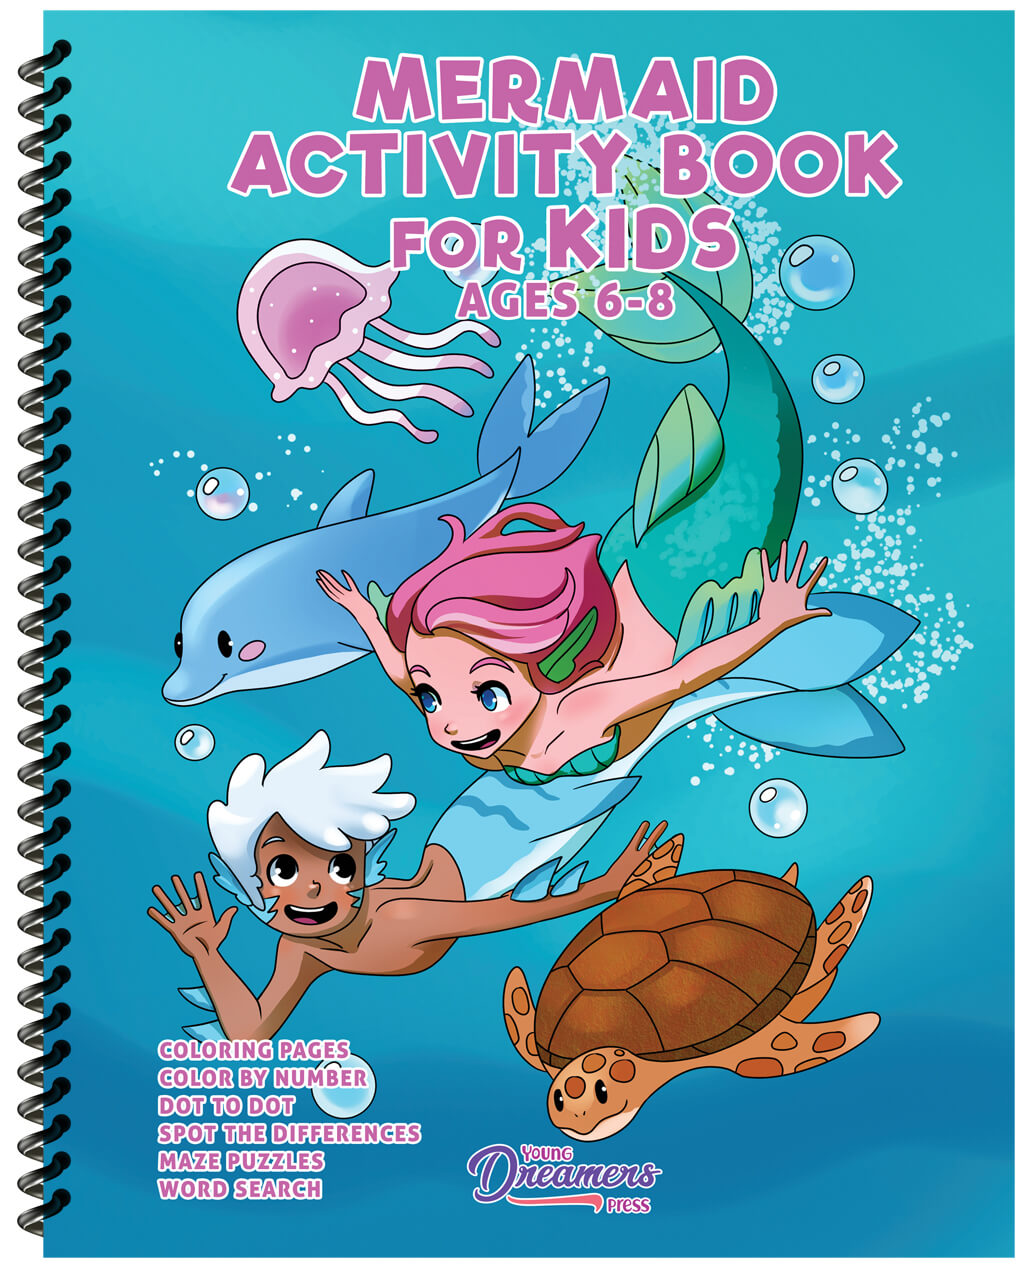 Mermaid Activity Book for Kids Ages 6-8 (Spiral Edition)